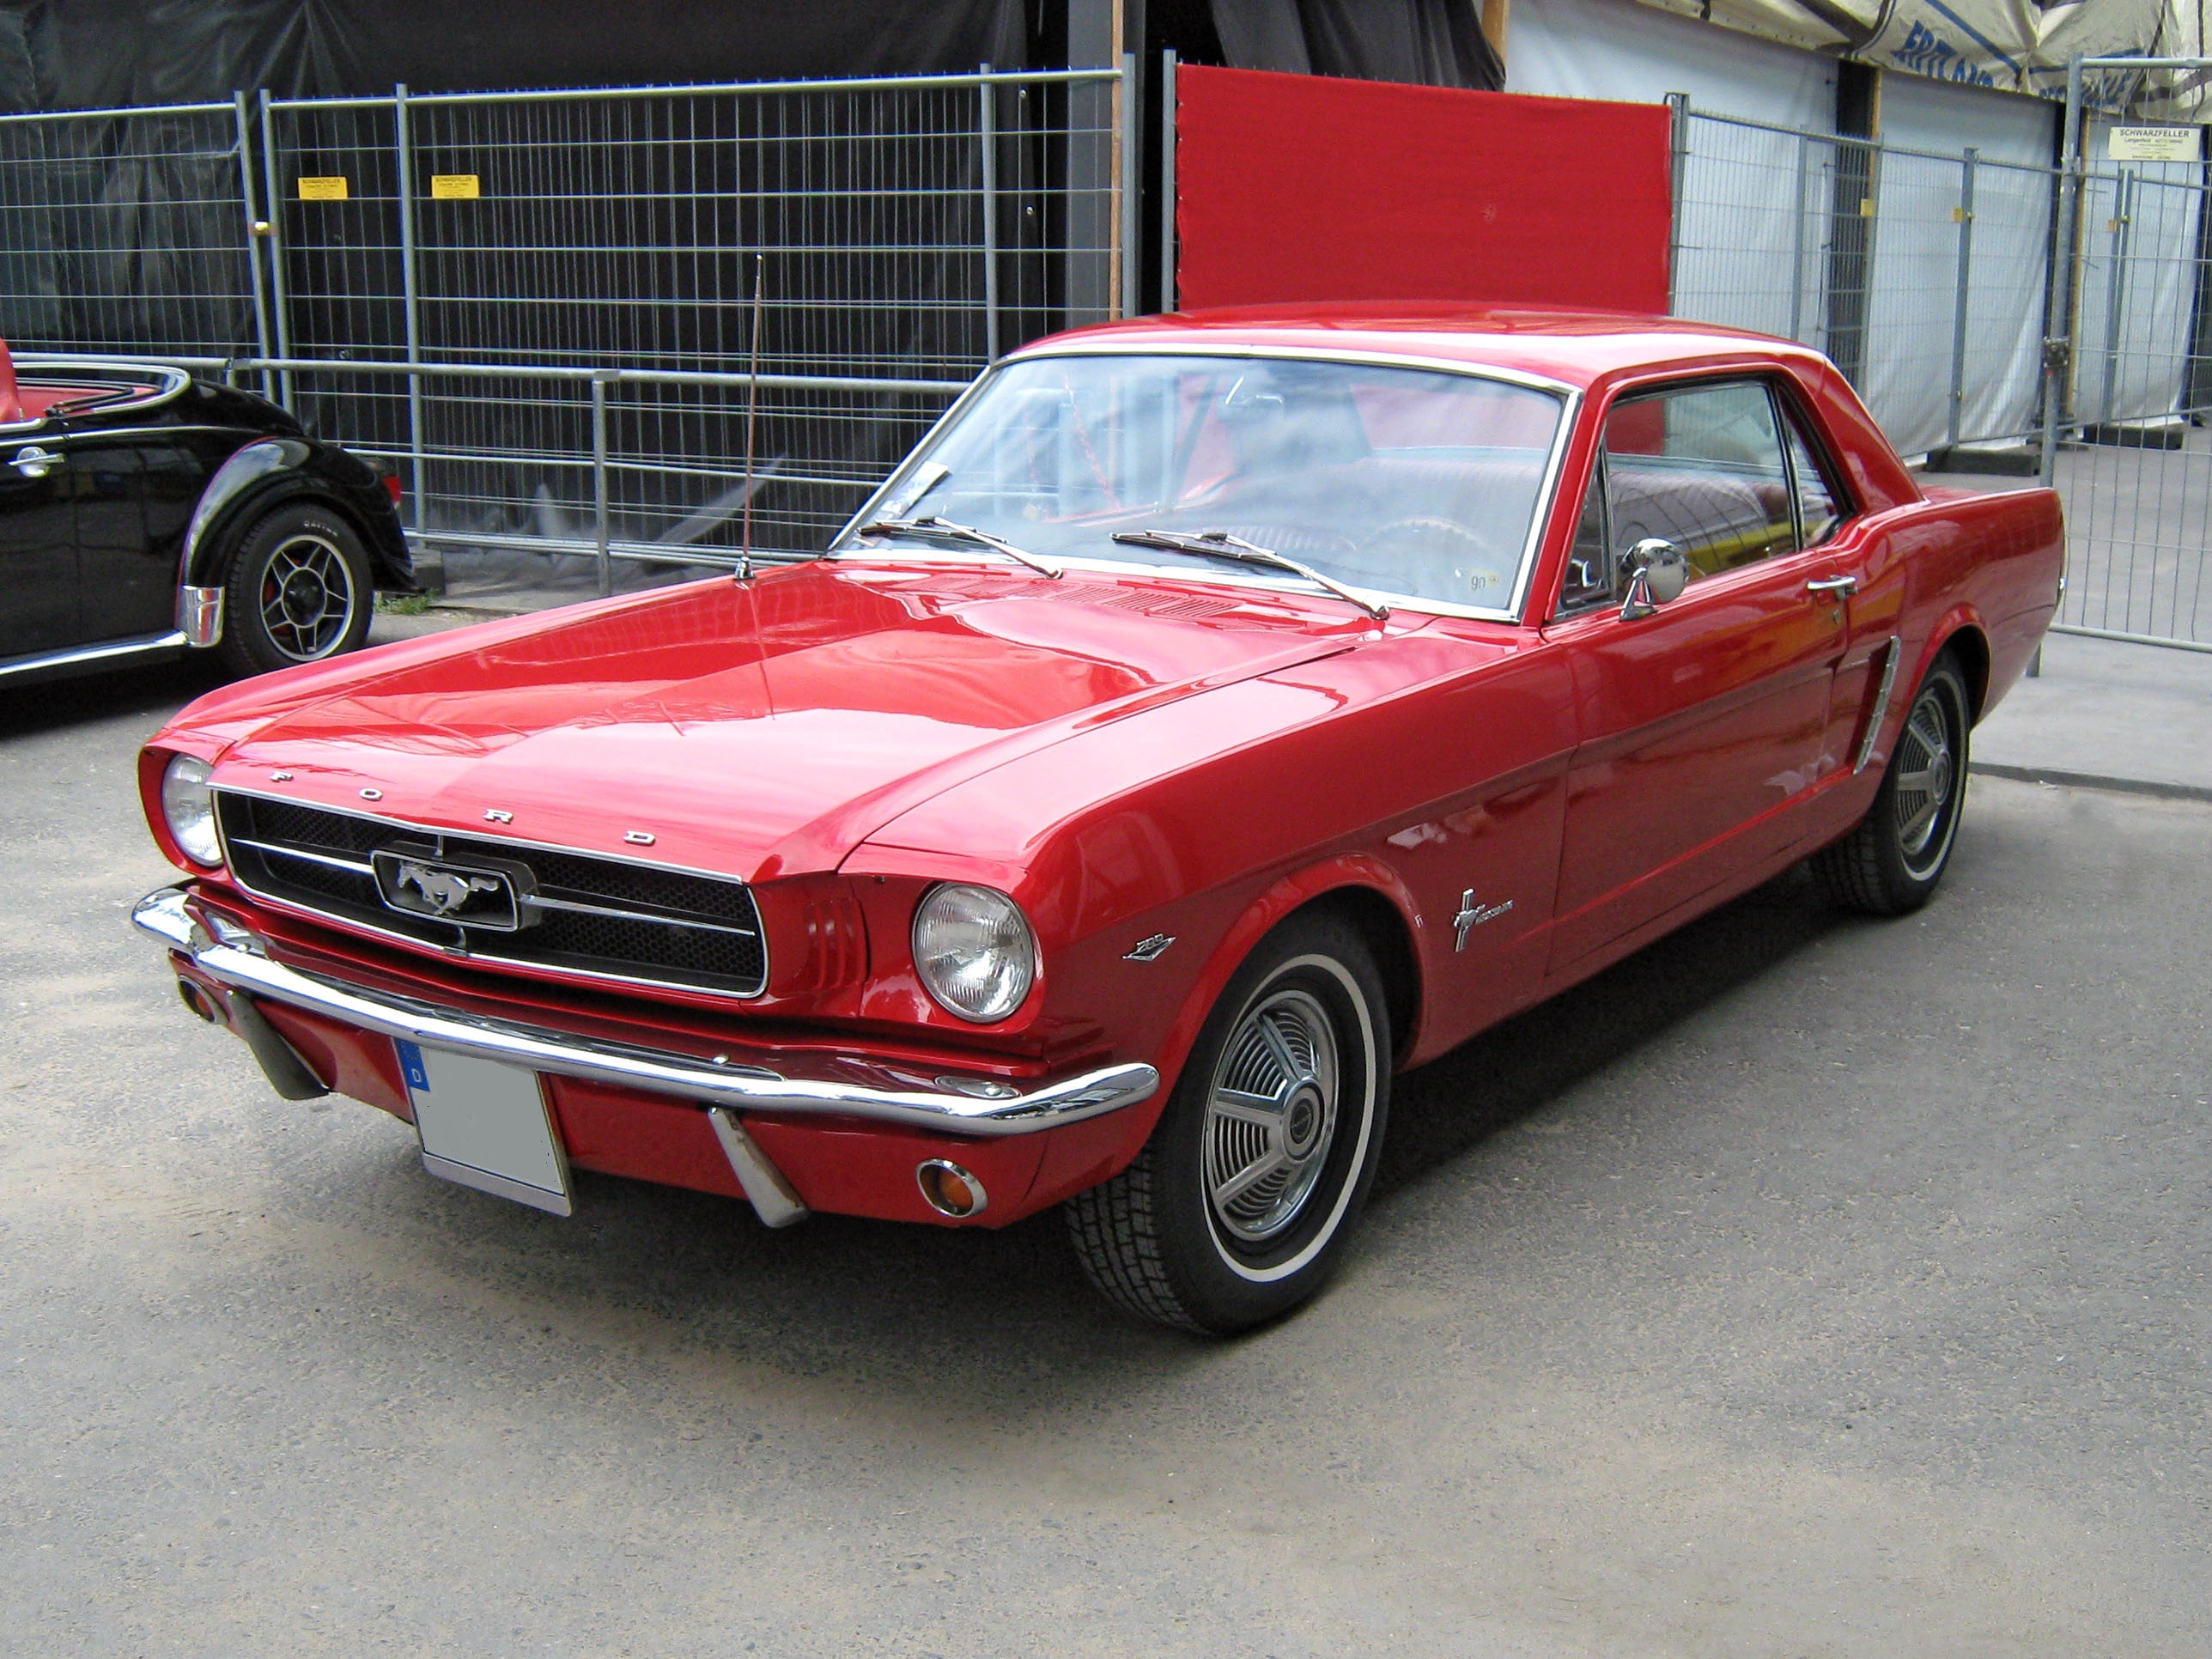 Lock Screen PC Wallpaper front view, ford, mustang, cars, 1965, hard roof